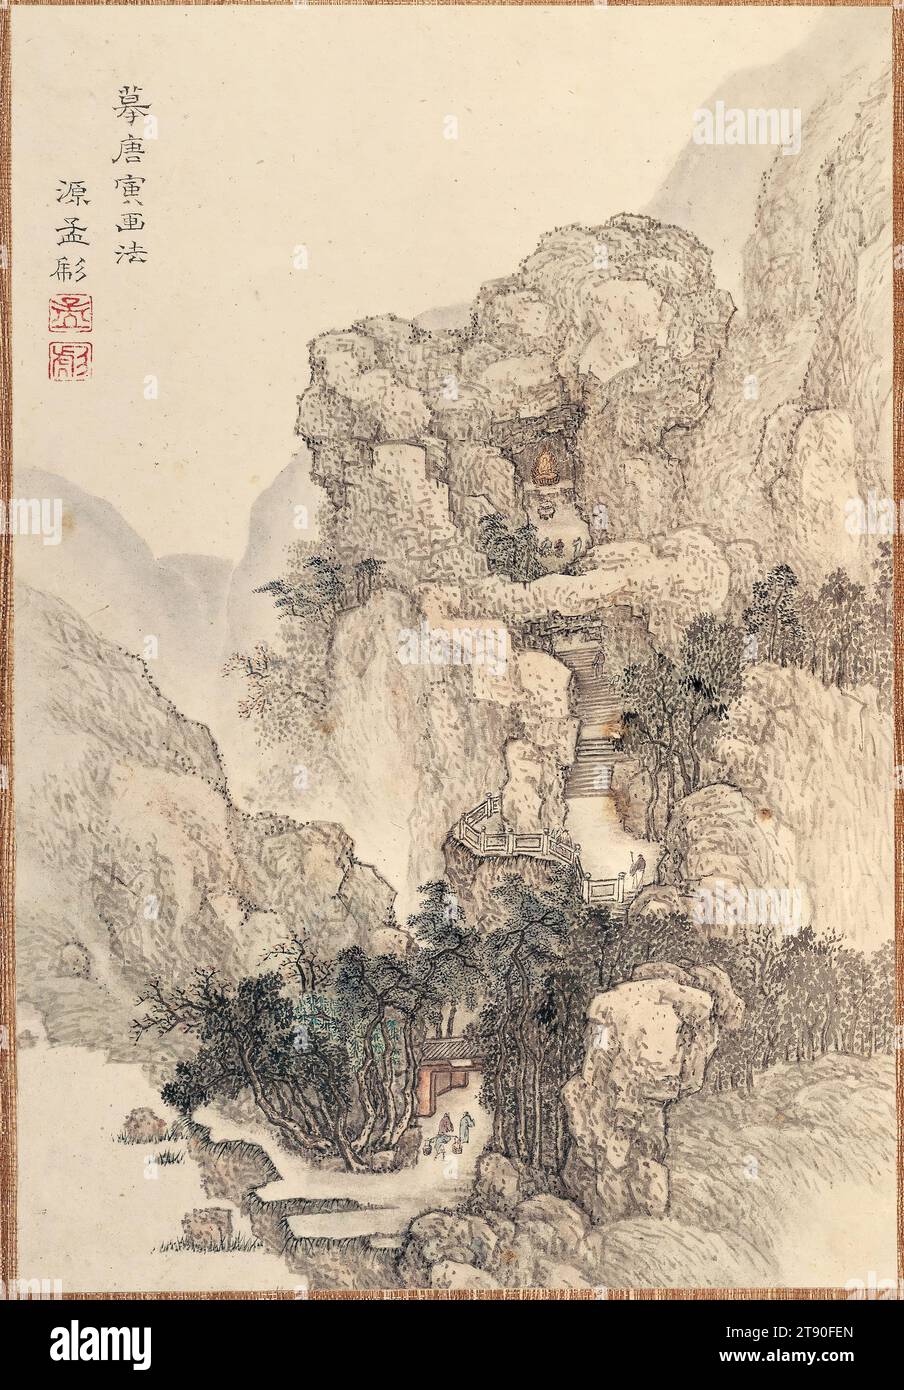 Album of Landscapes, mid 18th century, Kō Fuyō, Japanese, 1722 - 1784, 11 1/2 × 8 3/16 × 1 1/8 in. (29.21 × 20.8 × 2.86 cm), Ink and light color on paper, Japan, 18th century, On a cold moonlit night in early spring, a man parks his boat at the river’s edge, leaves his servant boy behind to watch the boat, and strolls up a mountain path toward an isolated pavilion. Wearing long, flowing, light blue robes, the man appears to pause just before a grove of gnarled plum trees covered with tiny white blossoms. Through the canopy of delicate flowers, he gazes up toward the dramatic mountain peak Stock Photo